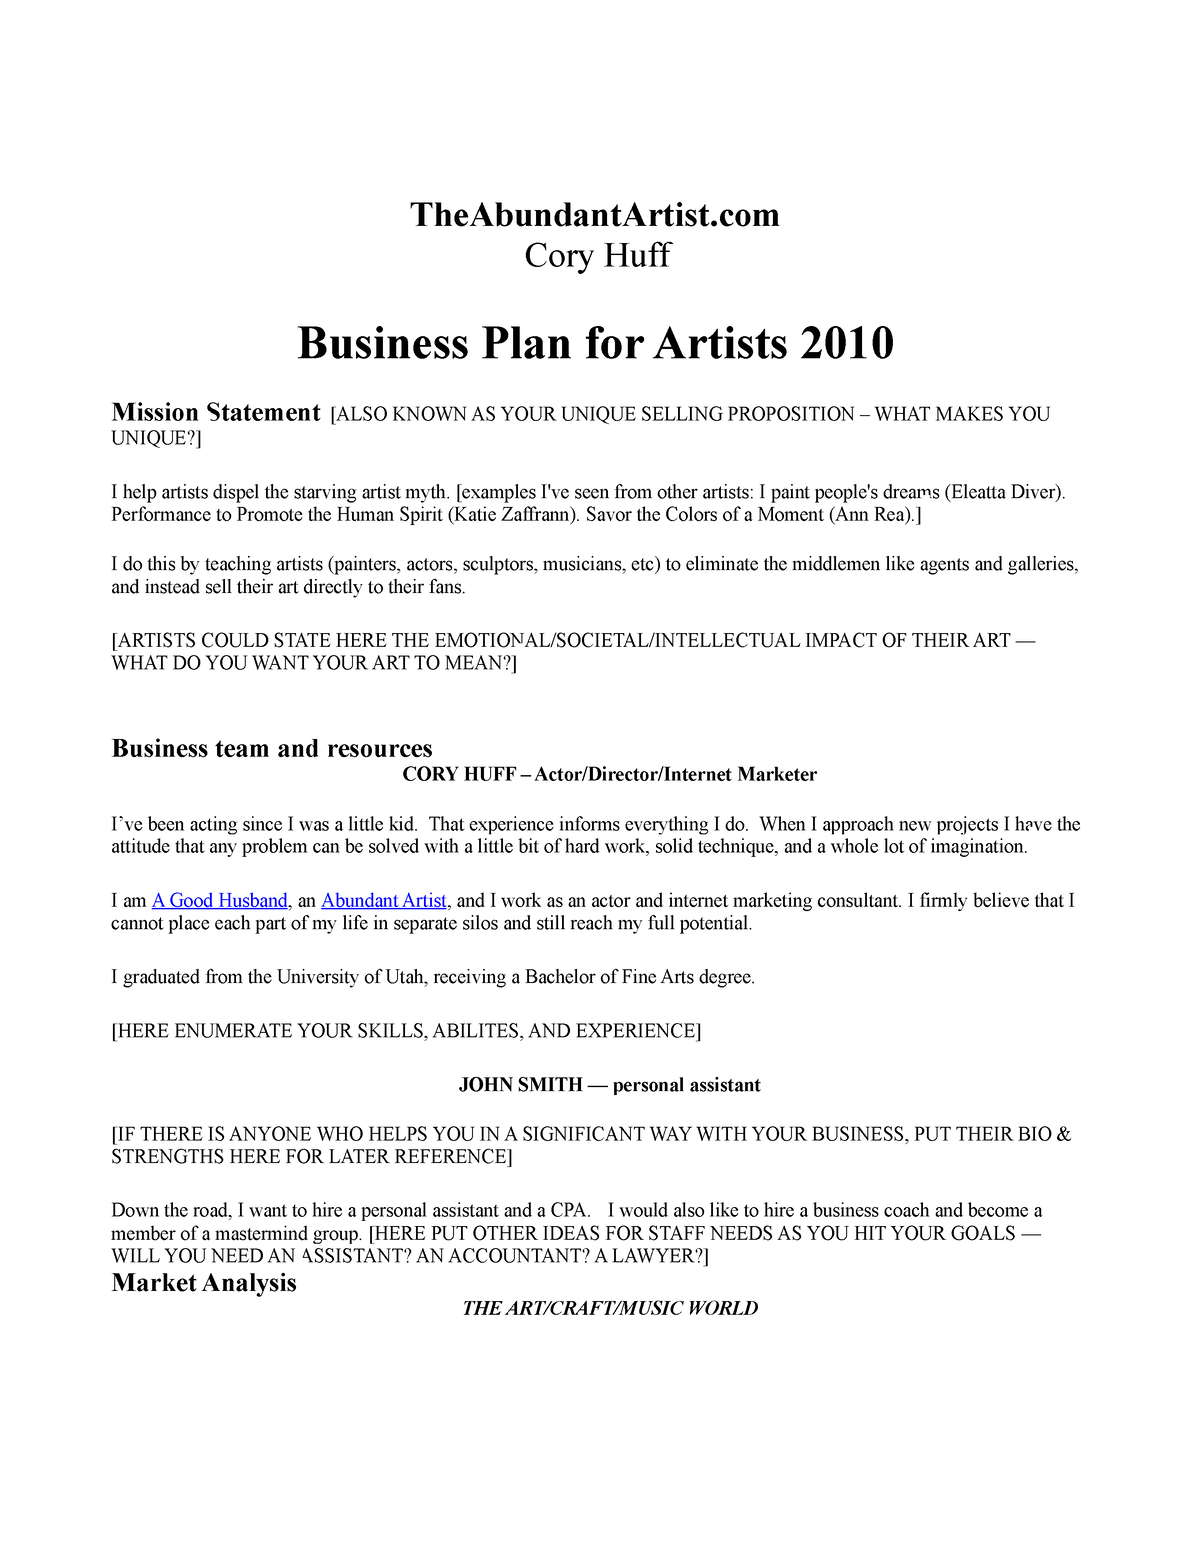 business plans for artists